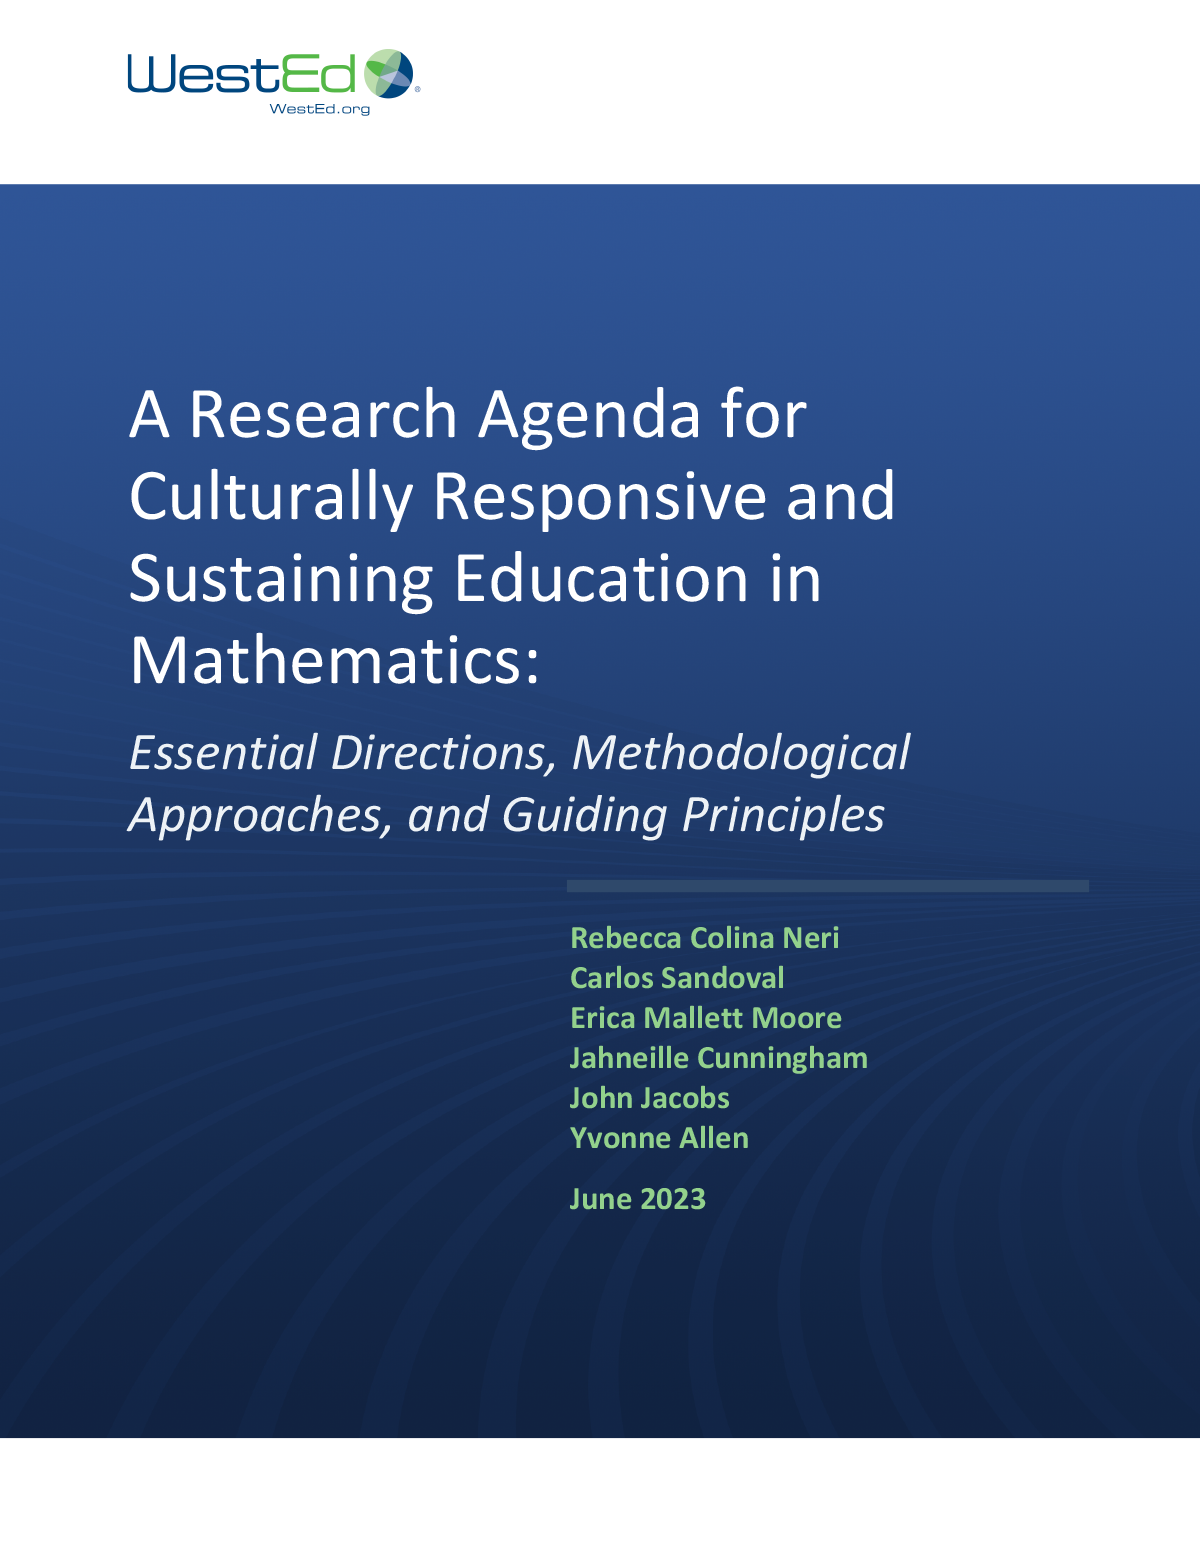 A Research Agenda for Culturally Responsive and Sustaining Education in Mathematics: Essential Directions, Methodological Approaches, and Guiding Principles